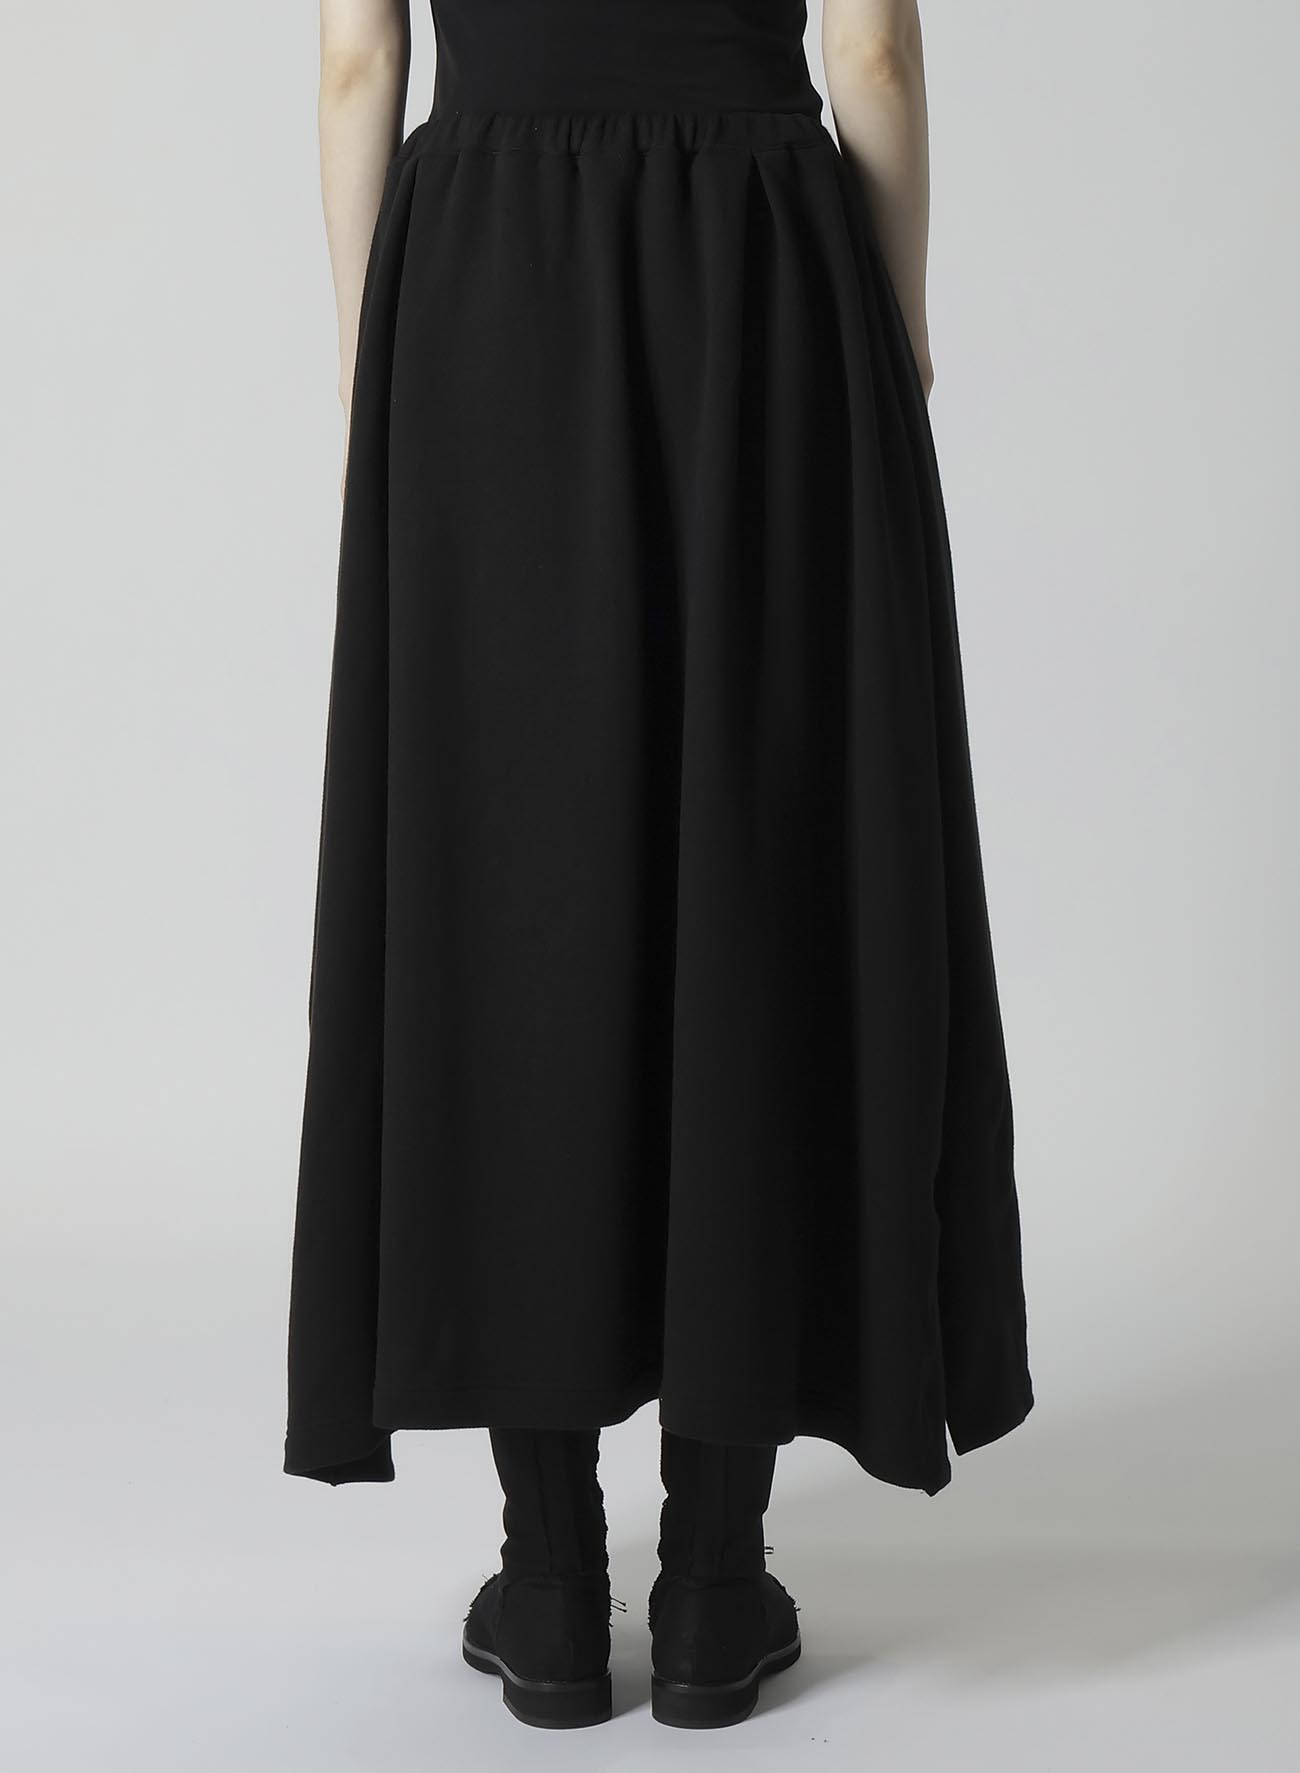 Liy/C FRENCH TERRY R-CUFF SKIRT